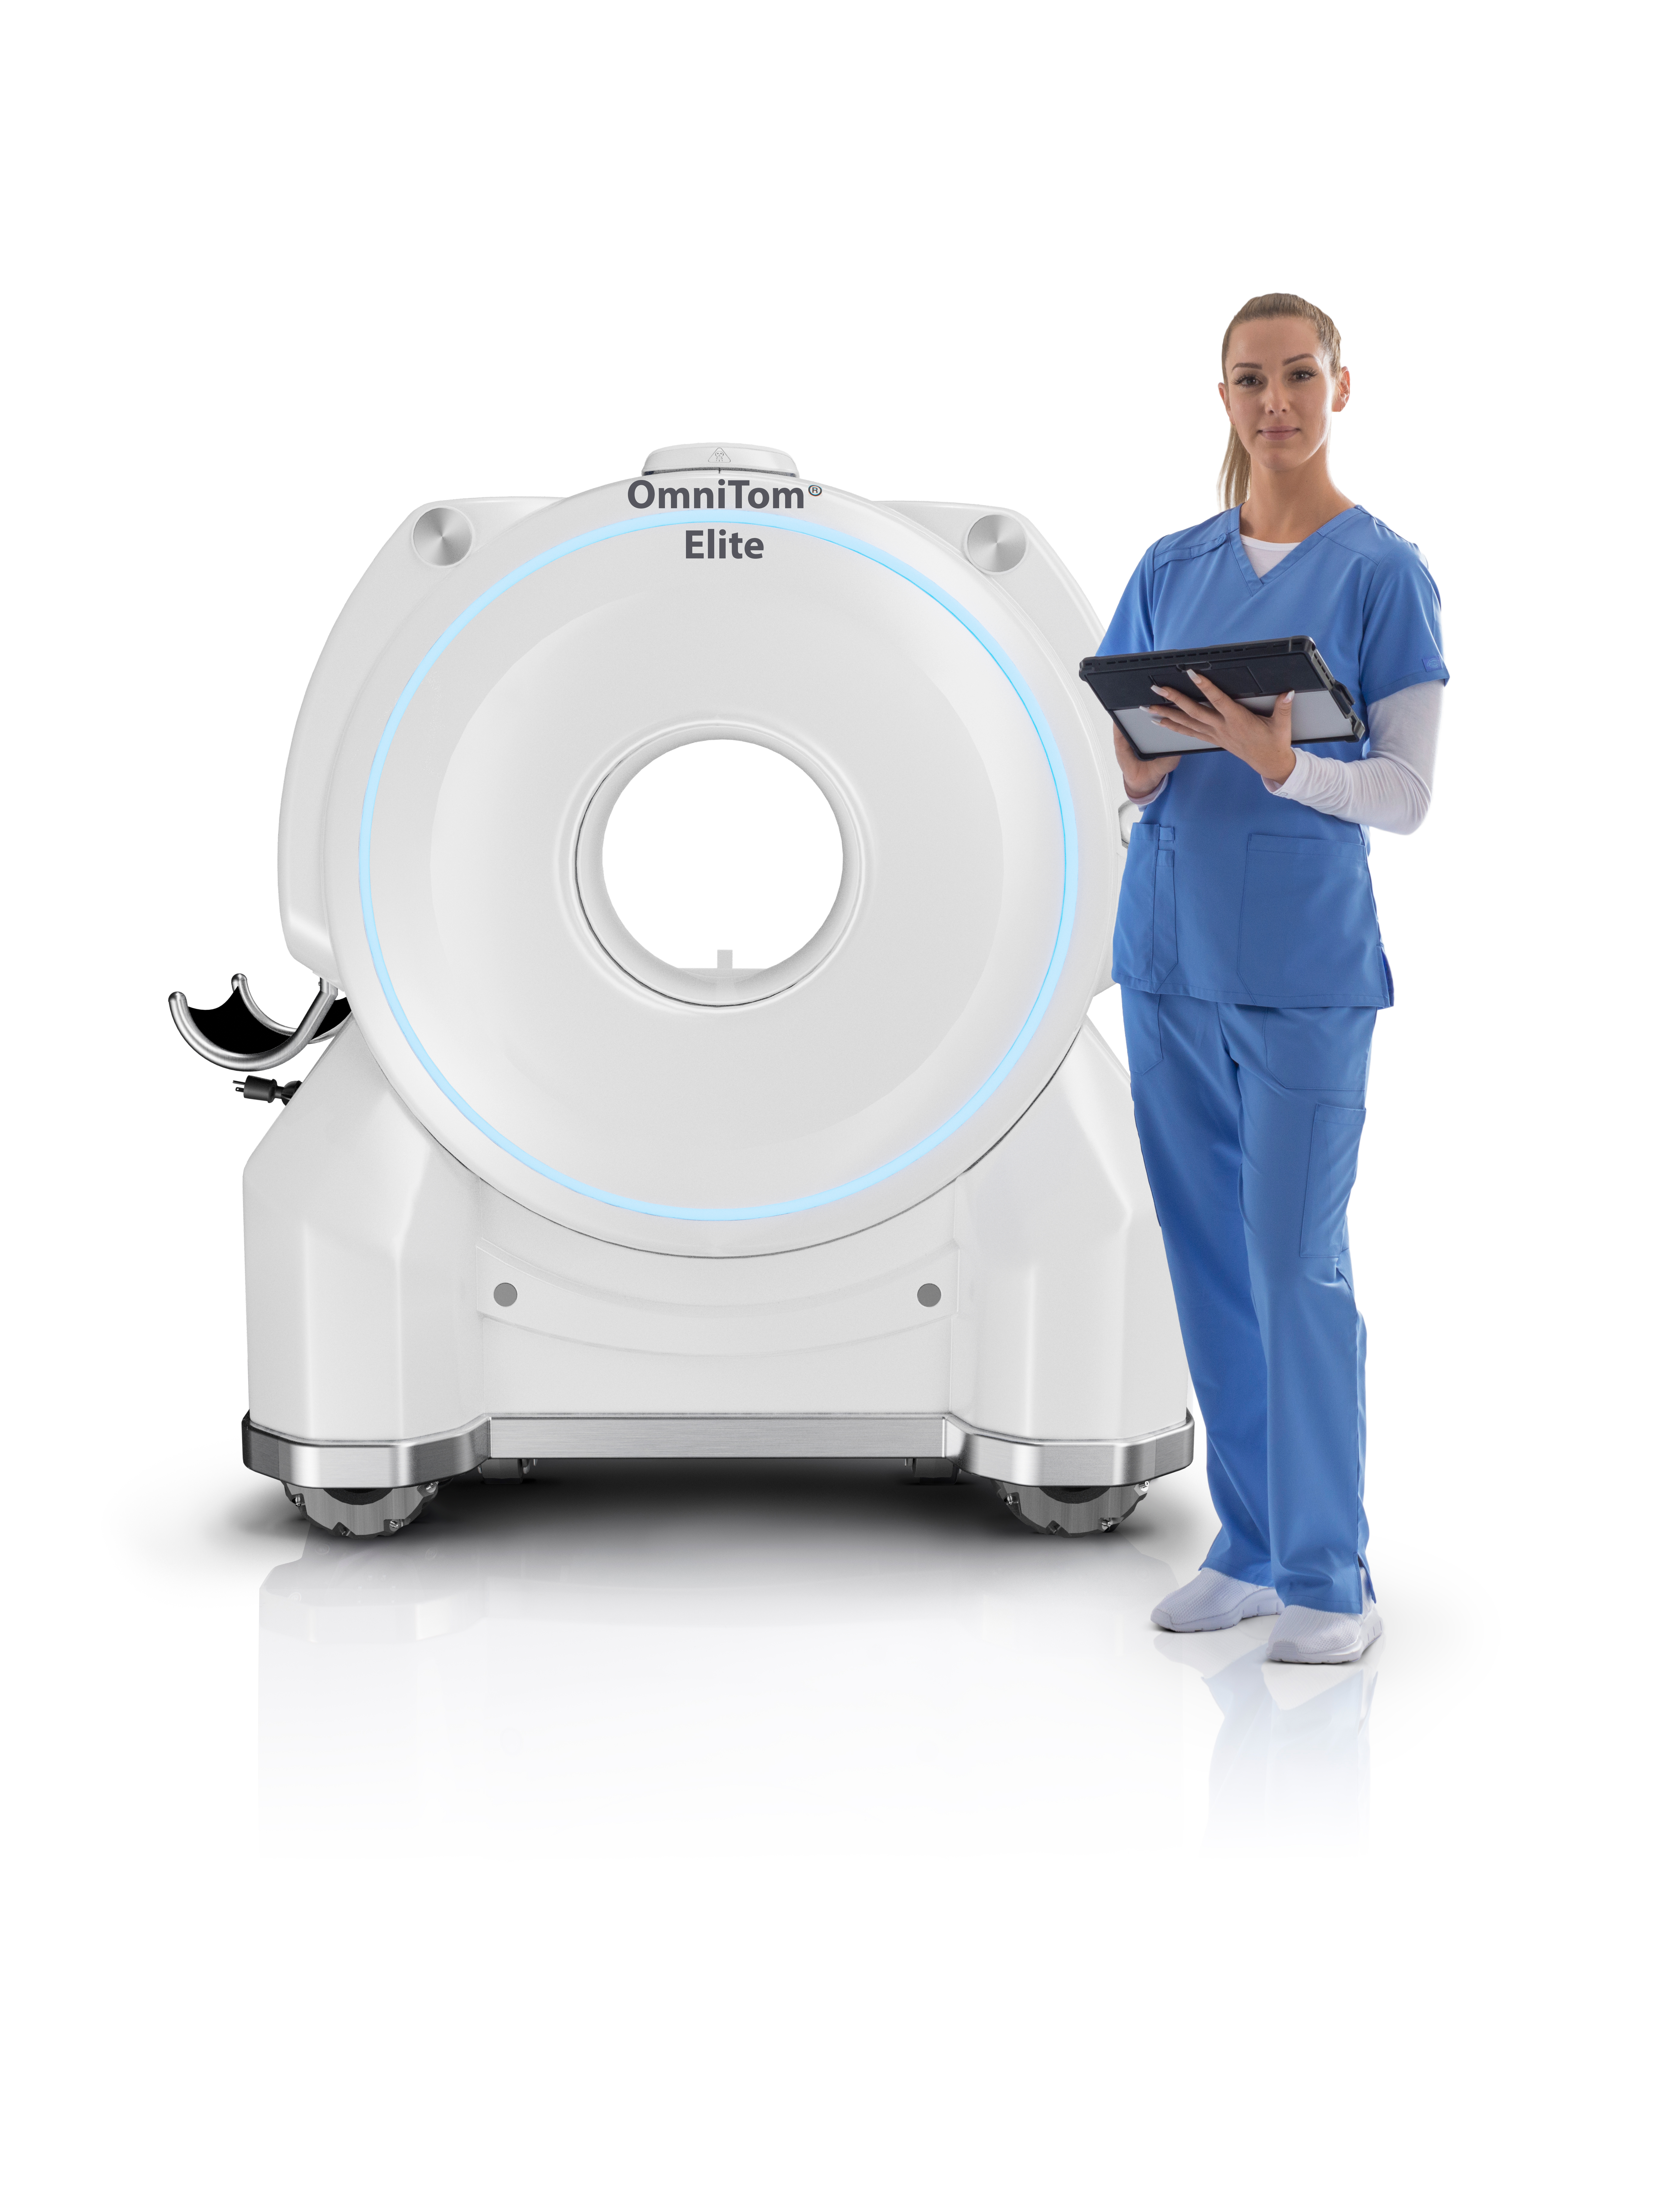 Mobile CT Scanner Allows Patients To Stay in the ICU While